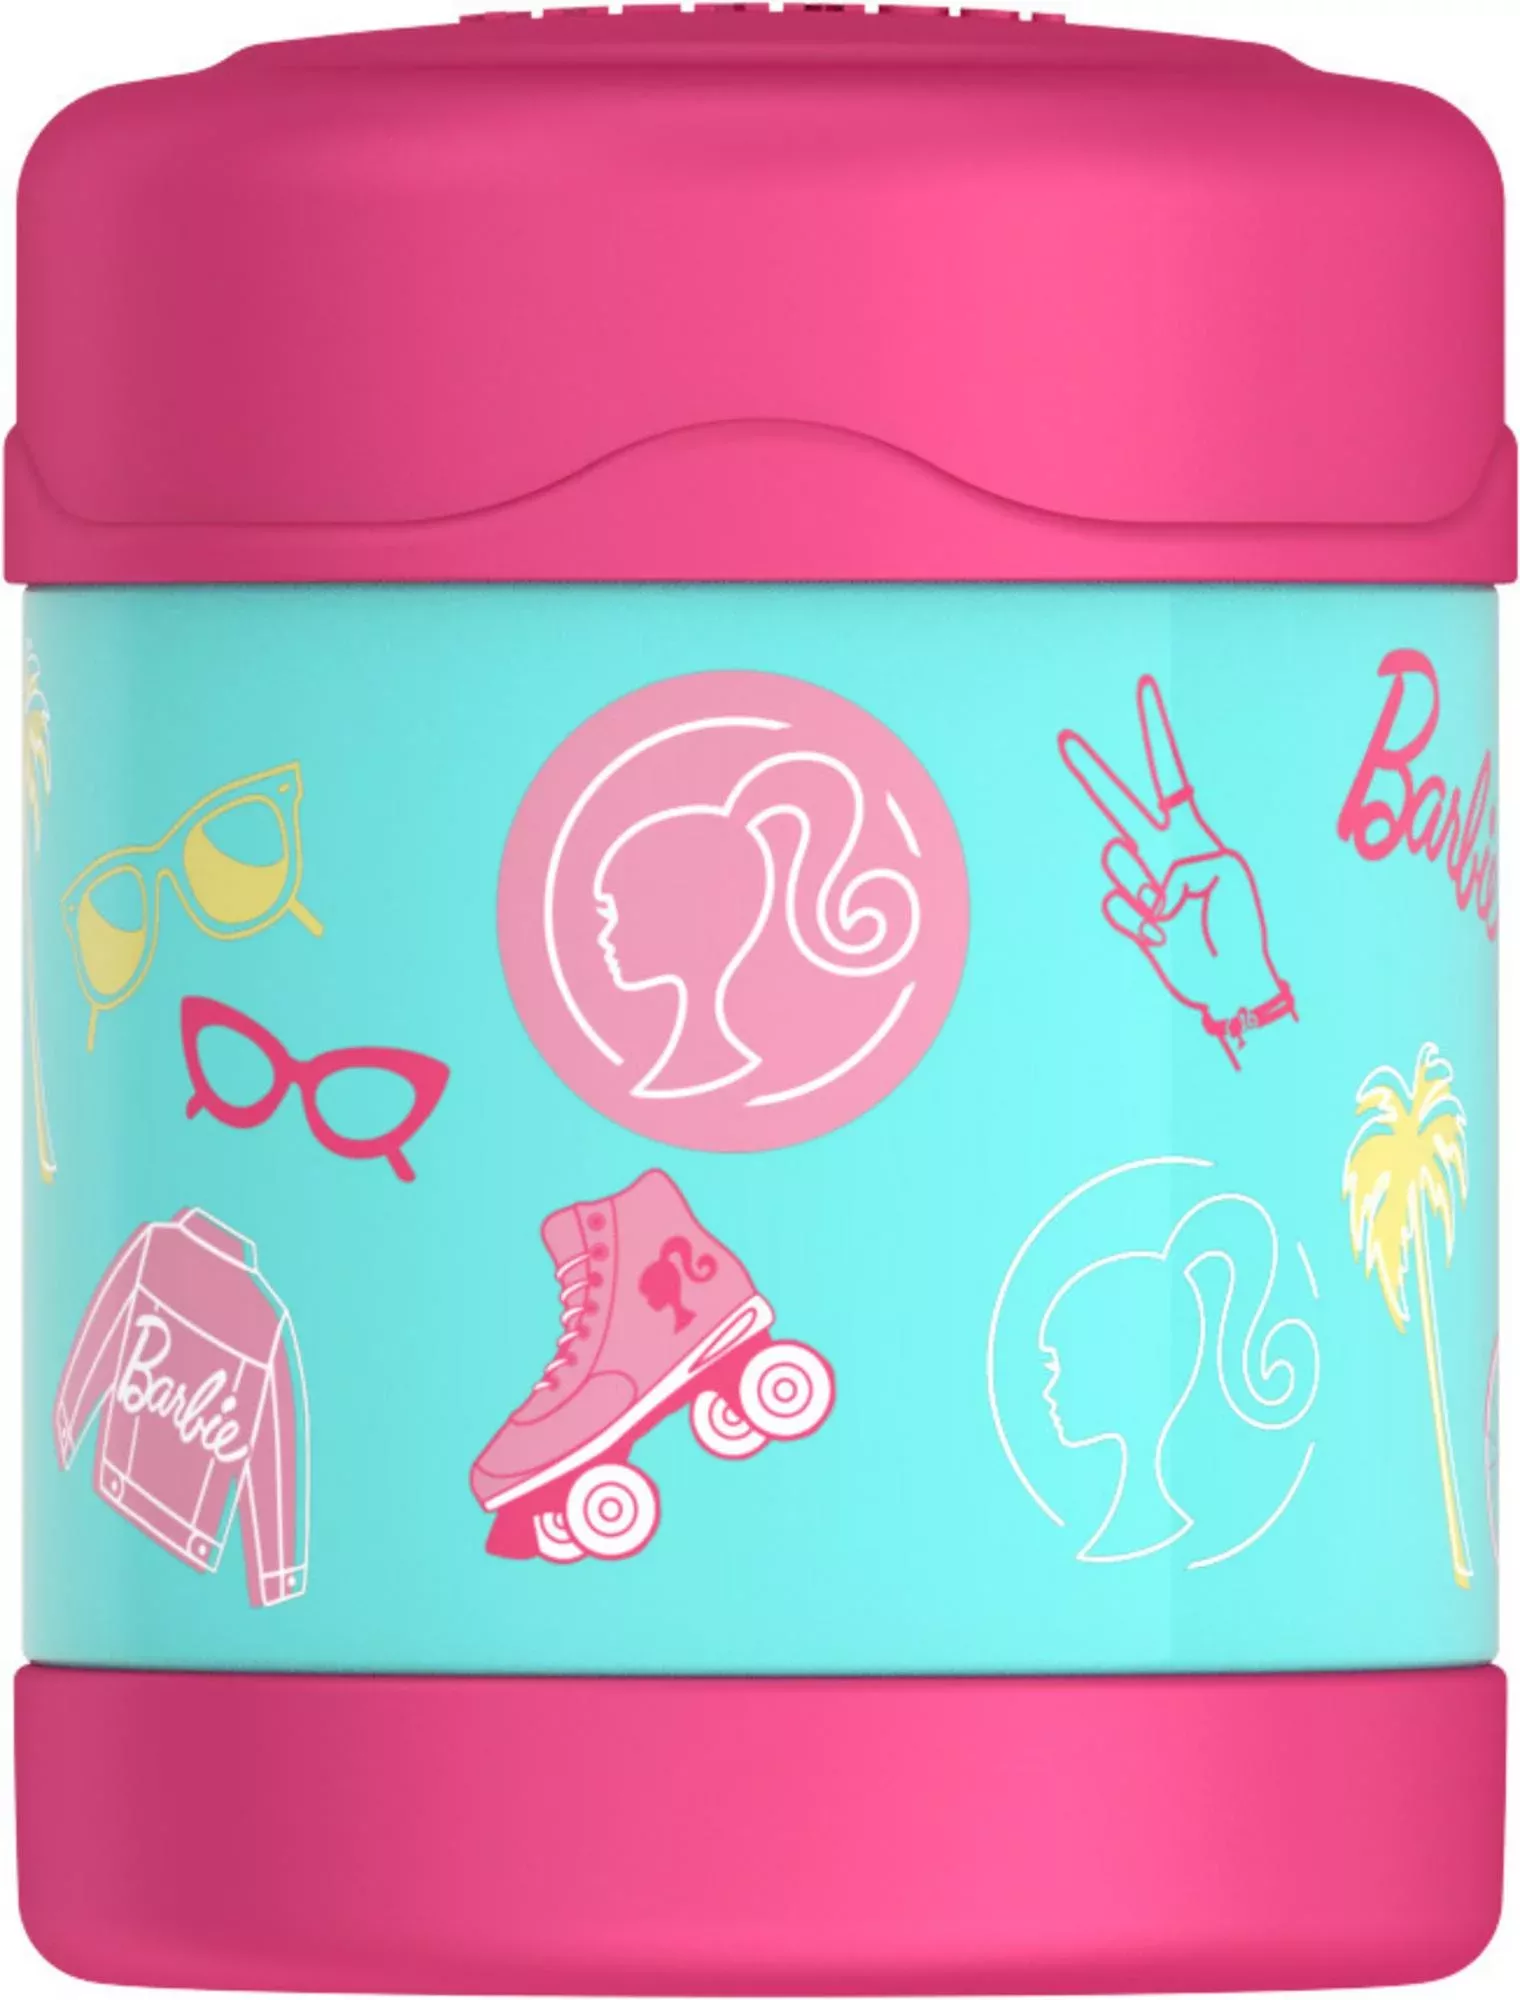 Barbie Thermos Reusable Lunch Bag, Plastic Water Bottle with Chug